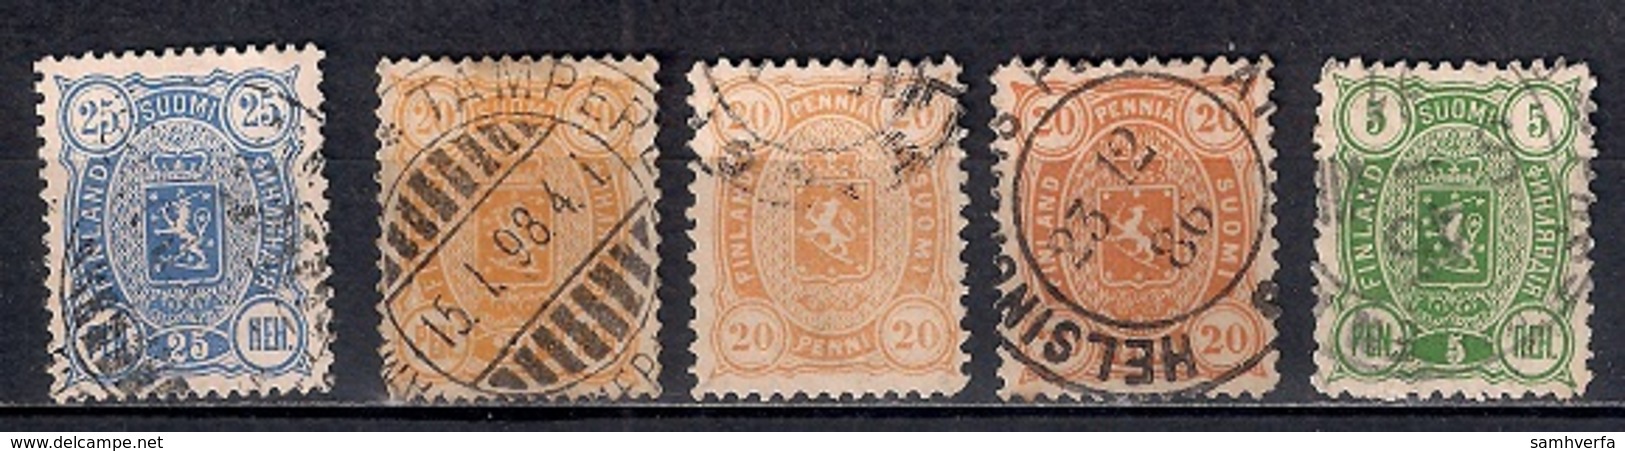 Finland 1885-89 - National Arms - Used Stamps